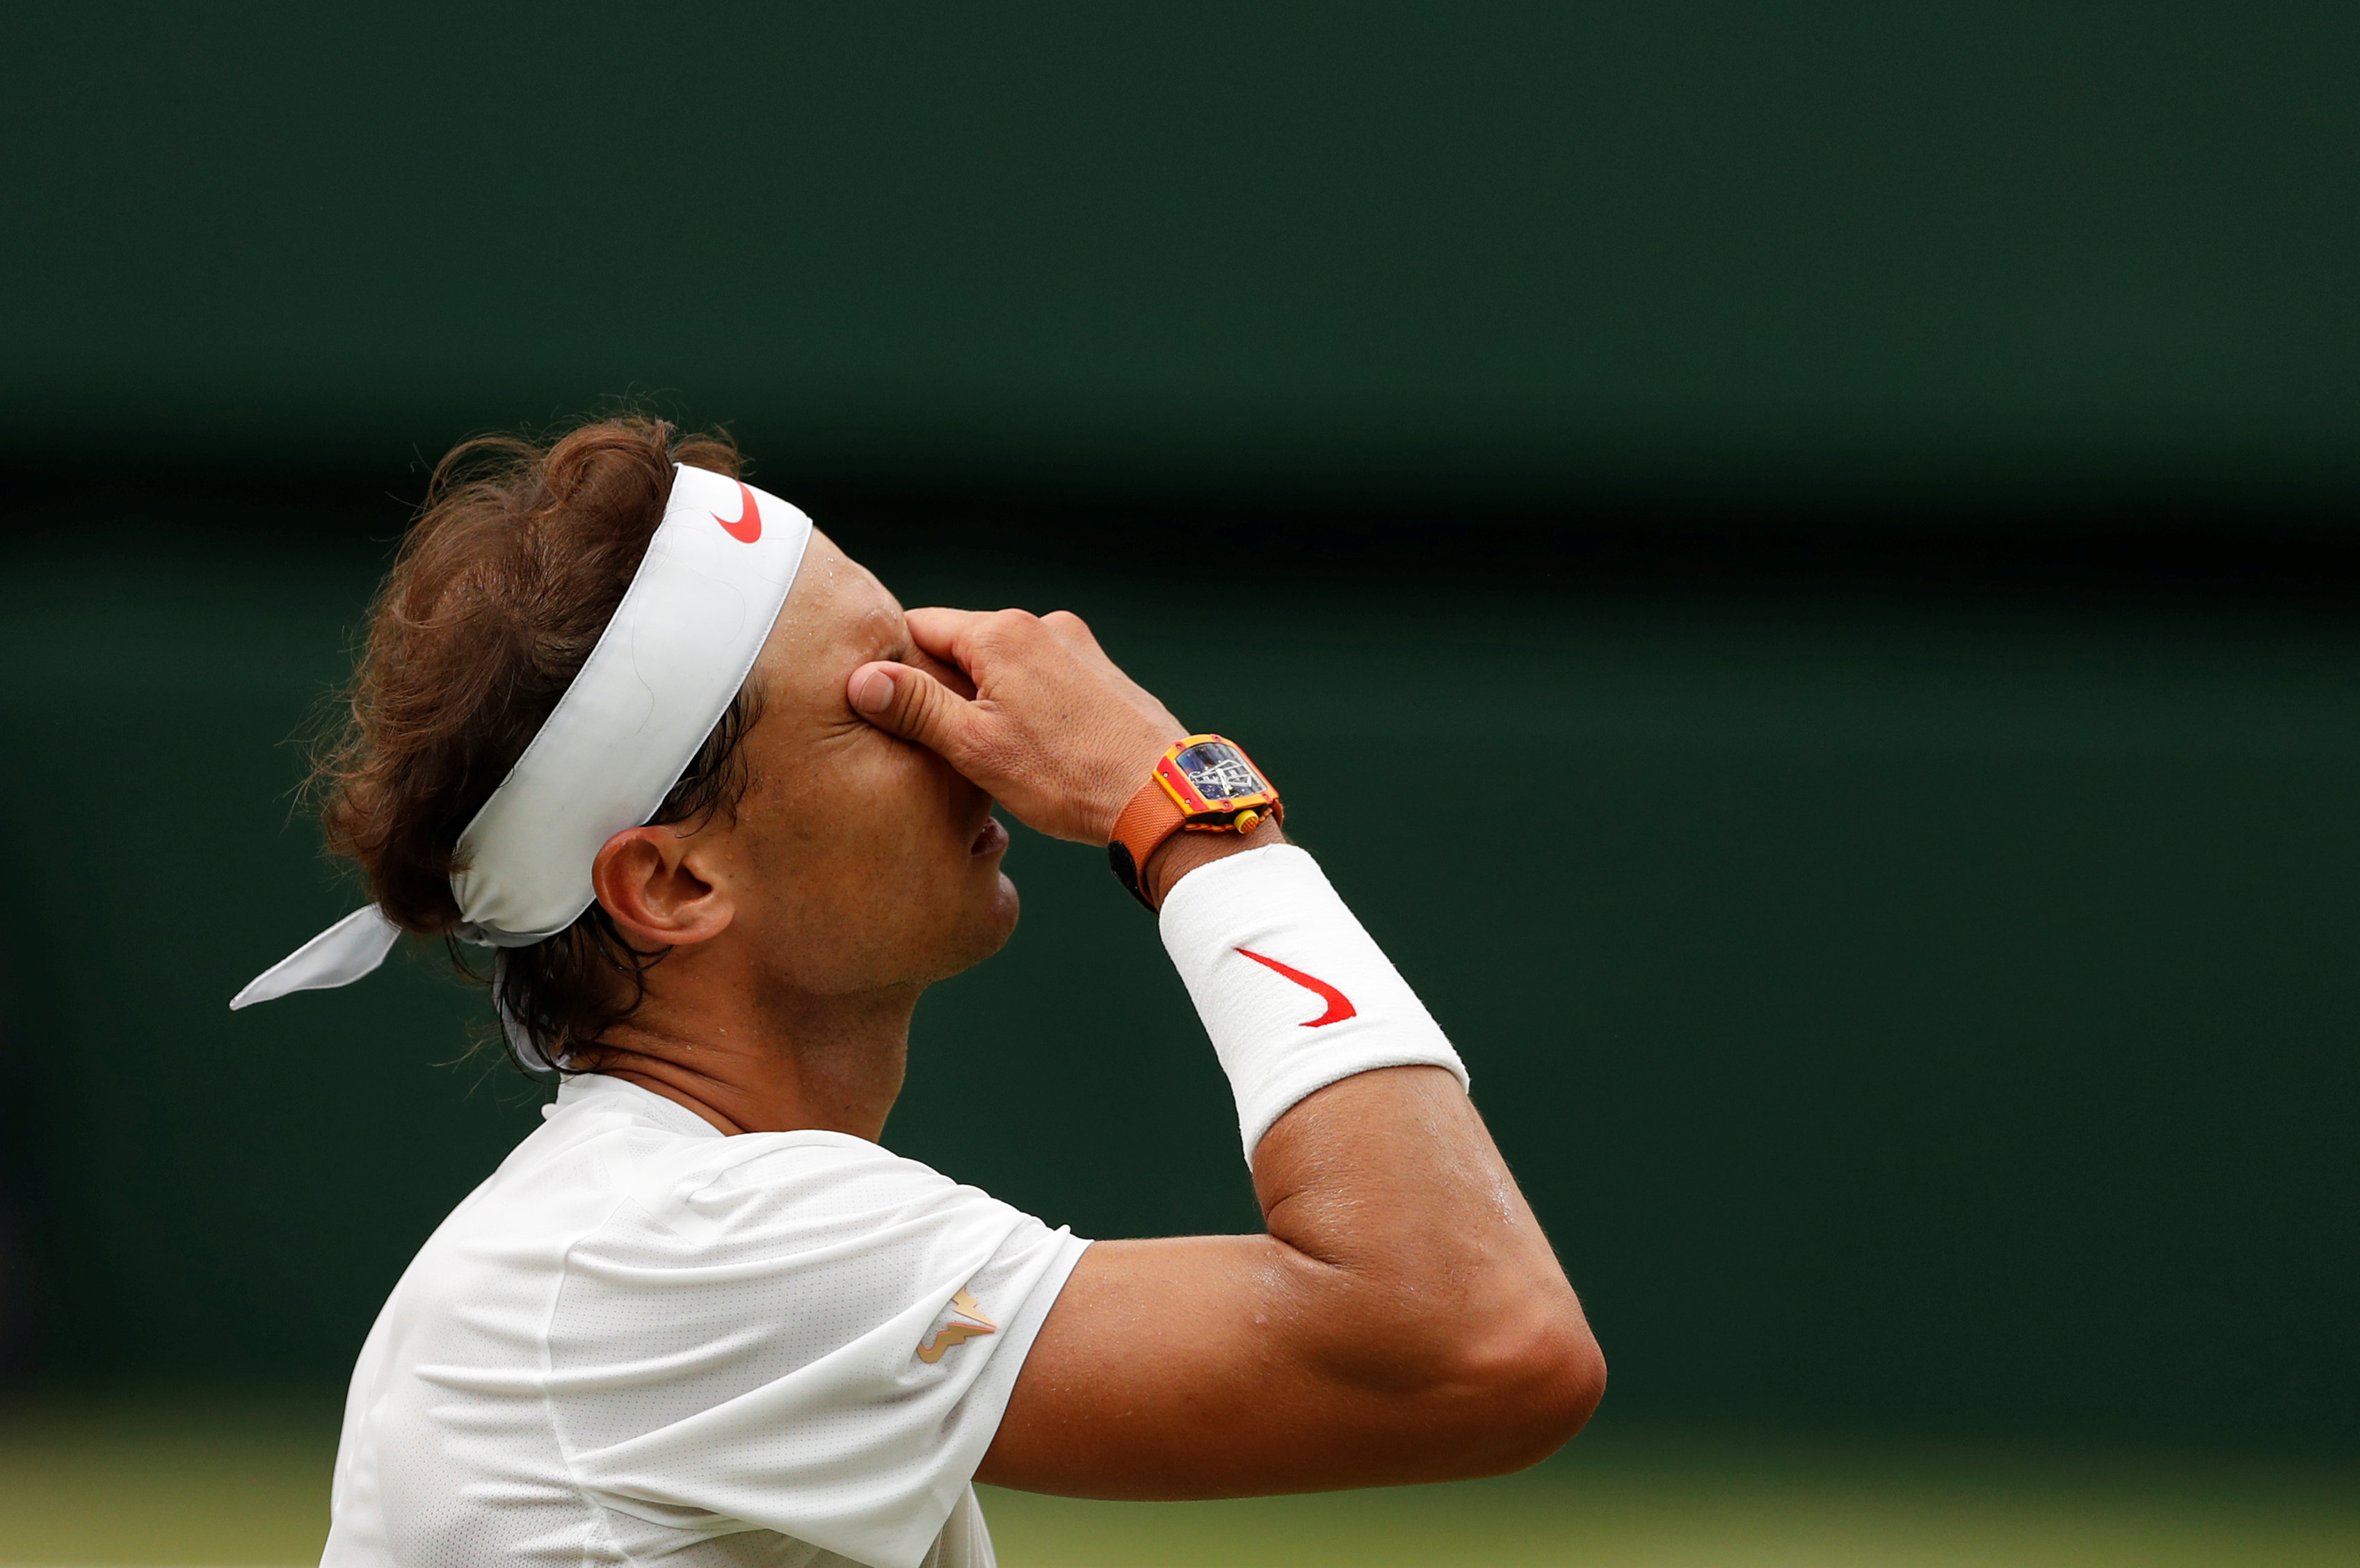 Tennis: Weary Nadal bows out of Wimbledon with pride